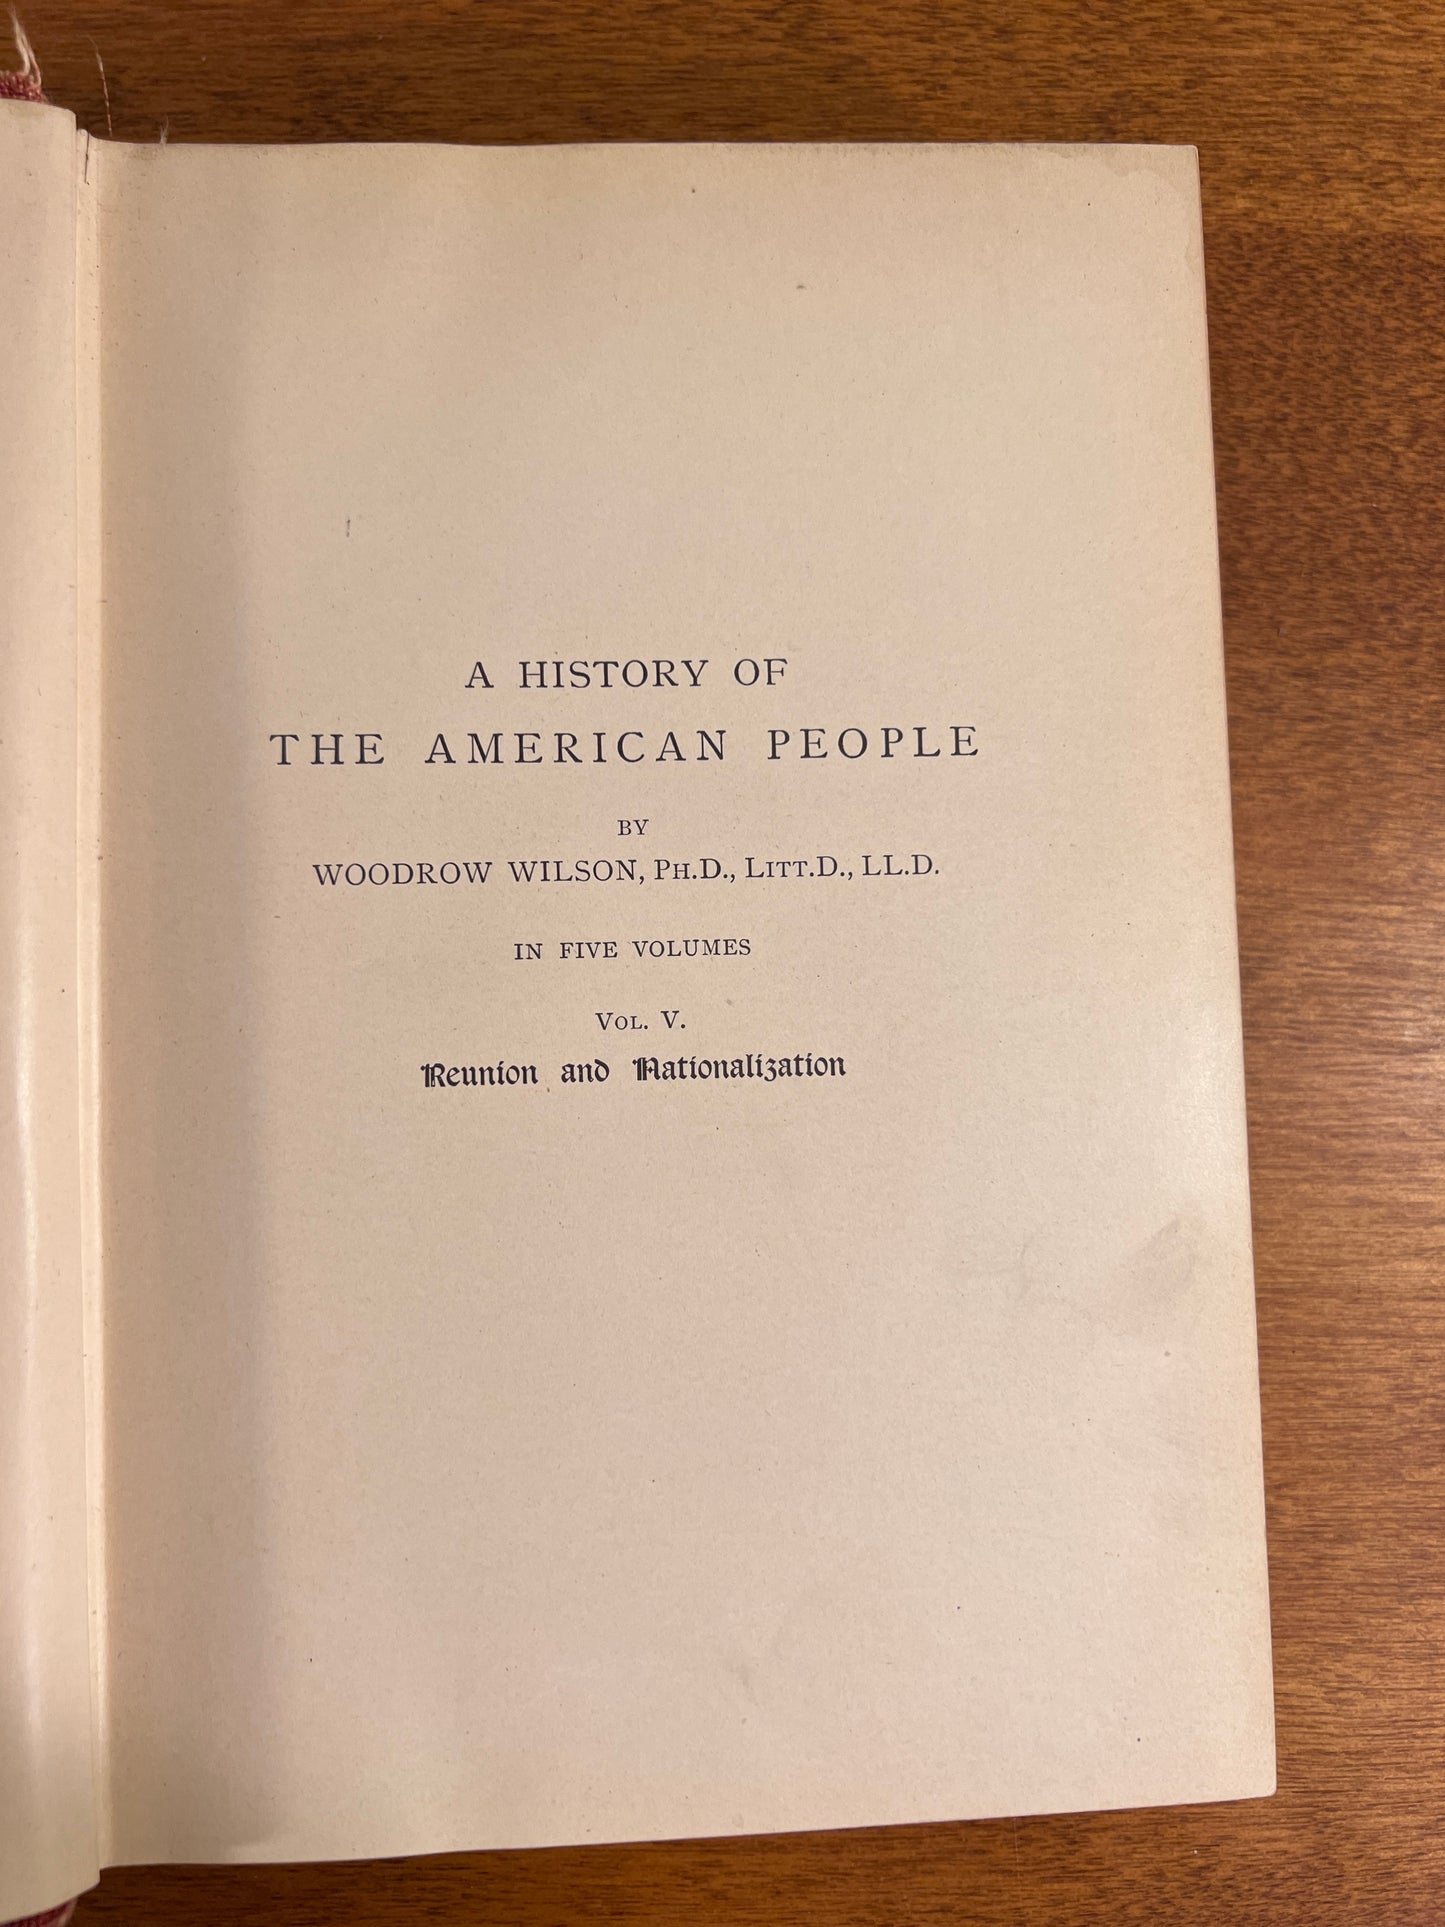 A History Of The American People Vol V by Woodrow Wilson, 1902